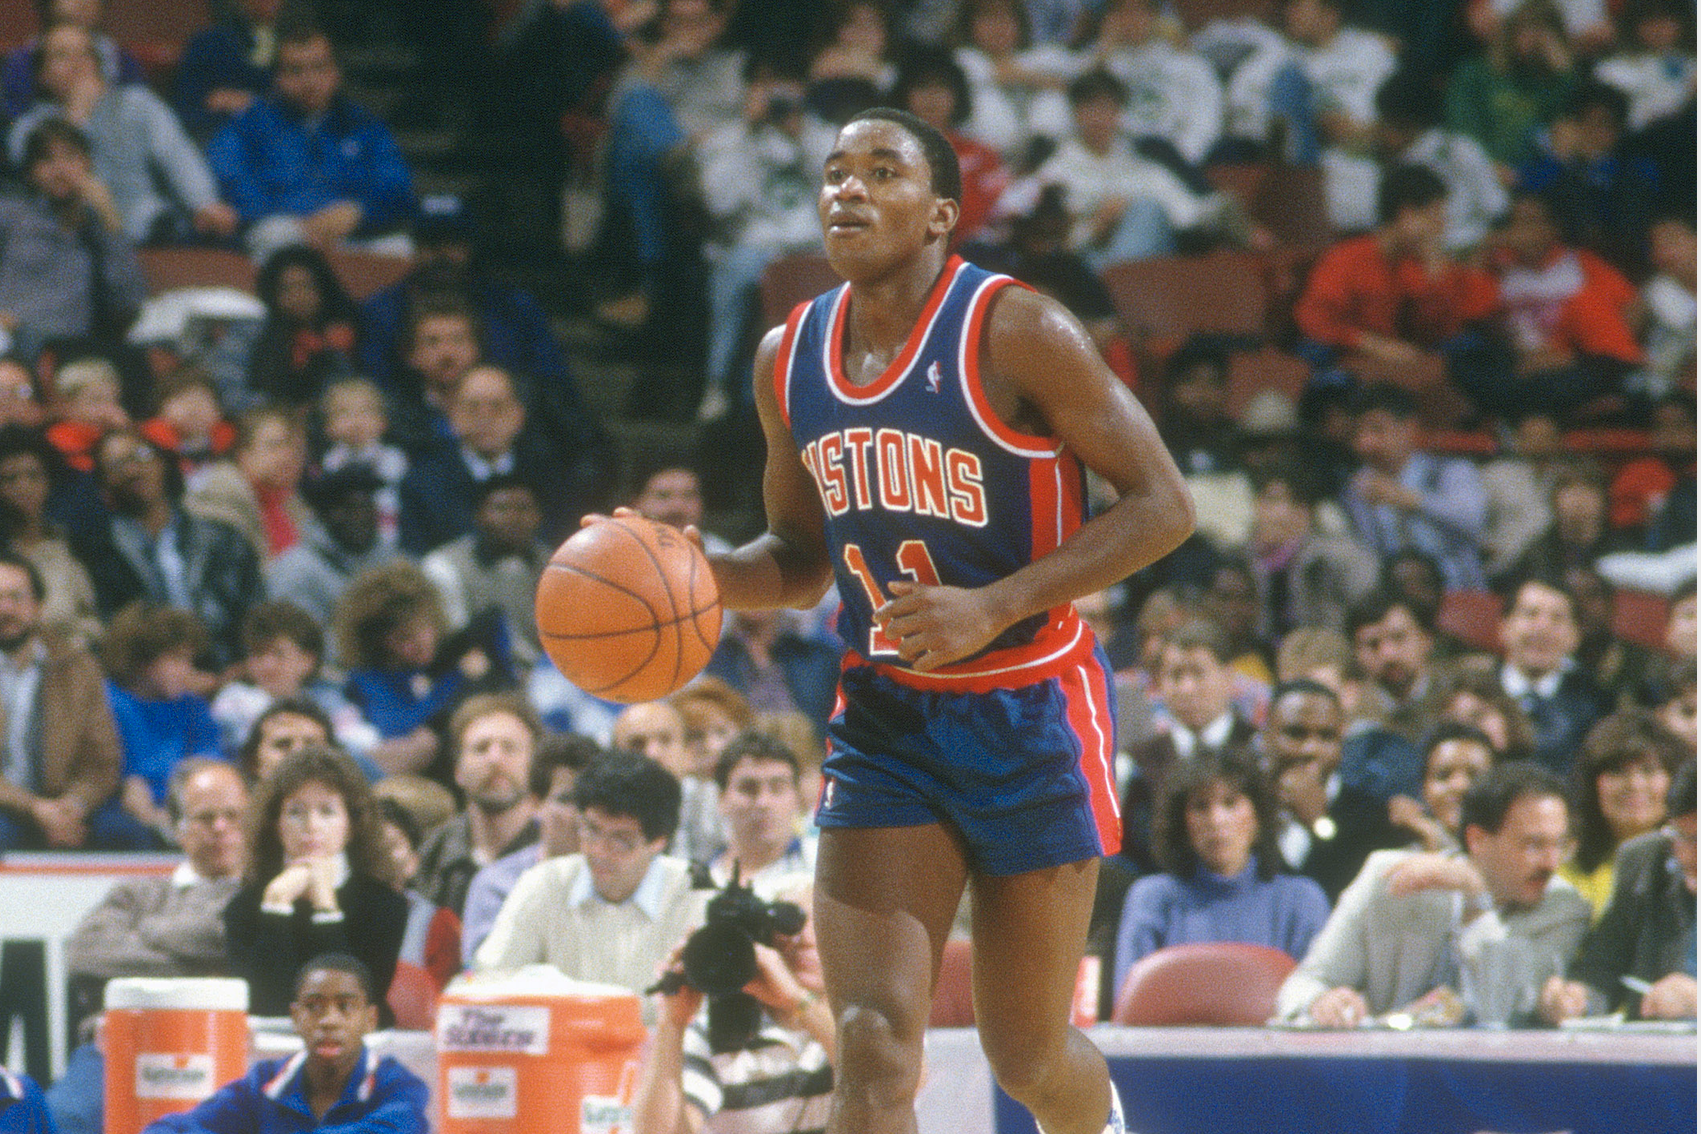 Rich Cohens New NBA Book Makes the Case for Isiah Thomas image photo